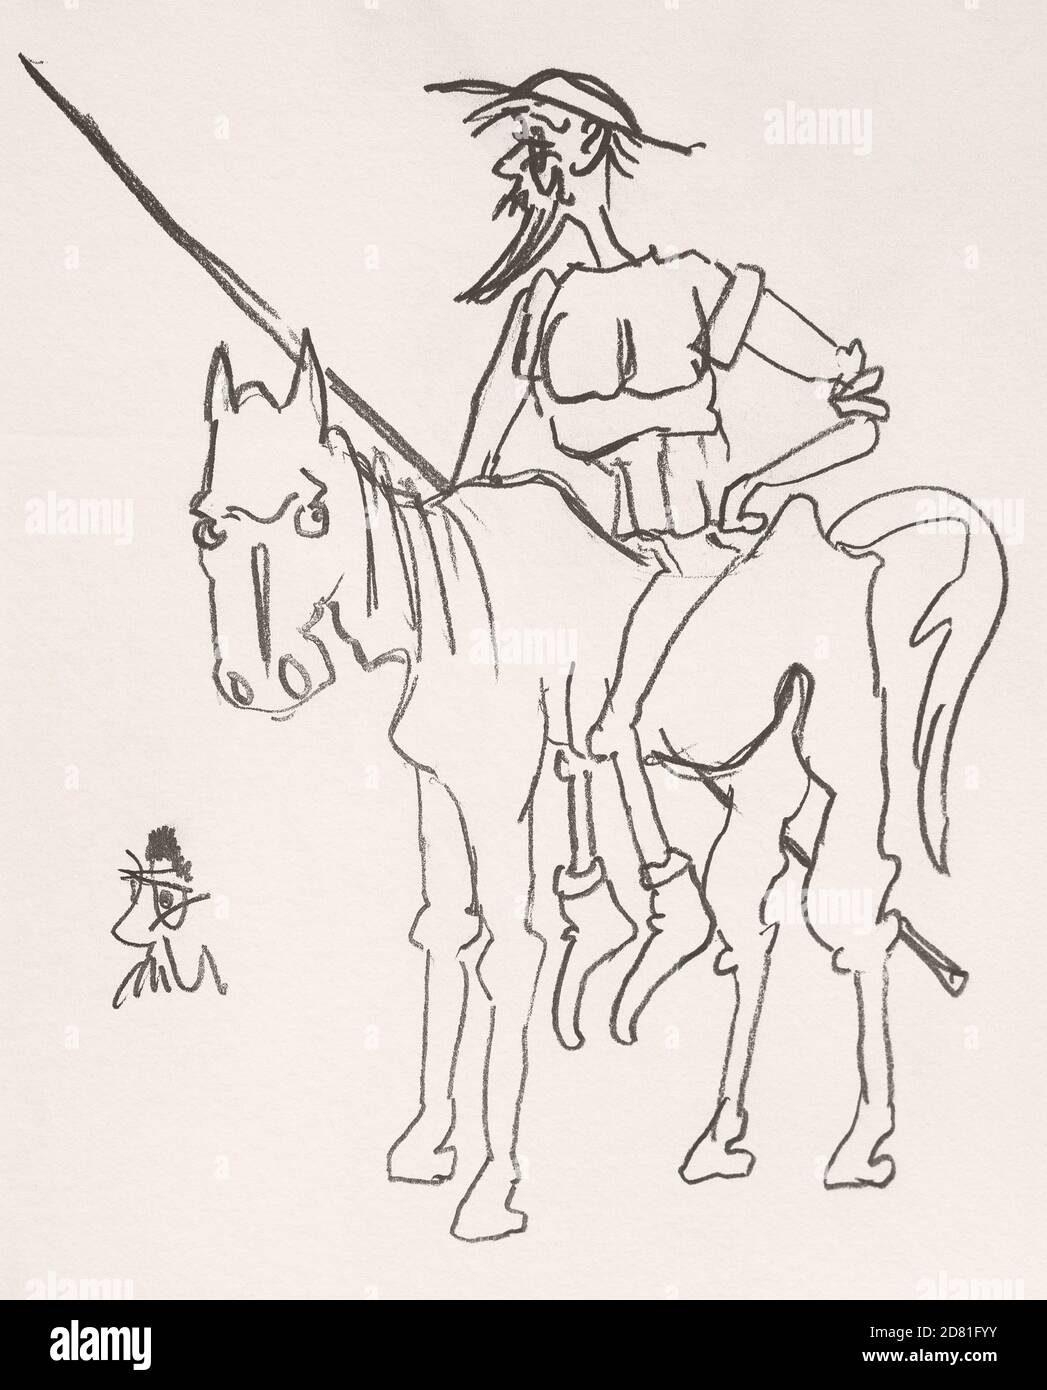 Illustration of Don Quixote, the knight errant on his exhausted horse Rocinante. Pen Drawing. The Ingenious Gentleman Don Quixote of La Mancha Stock Photo